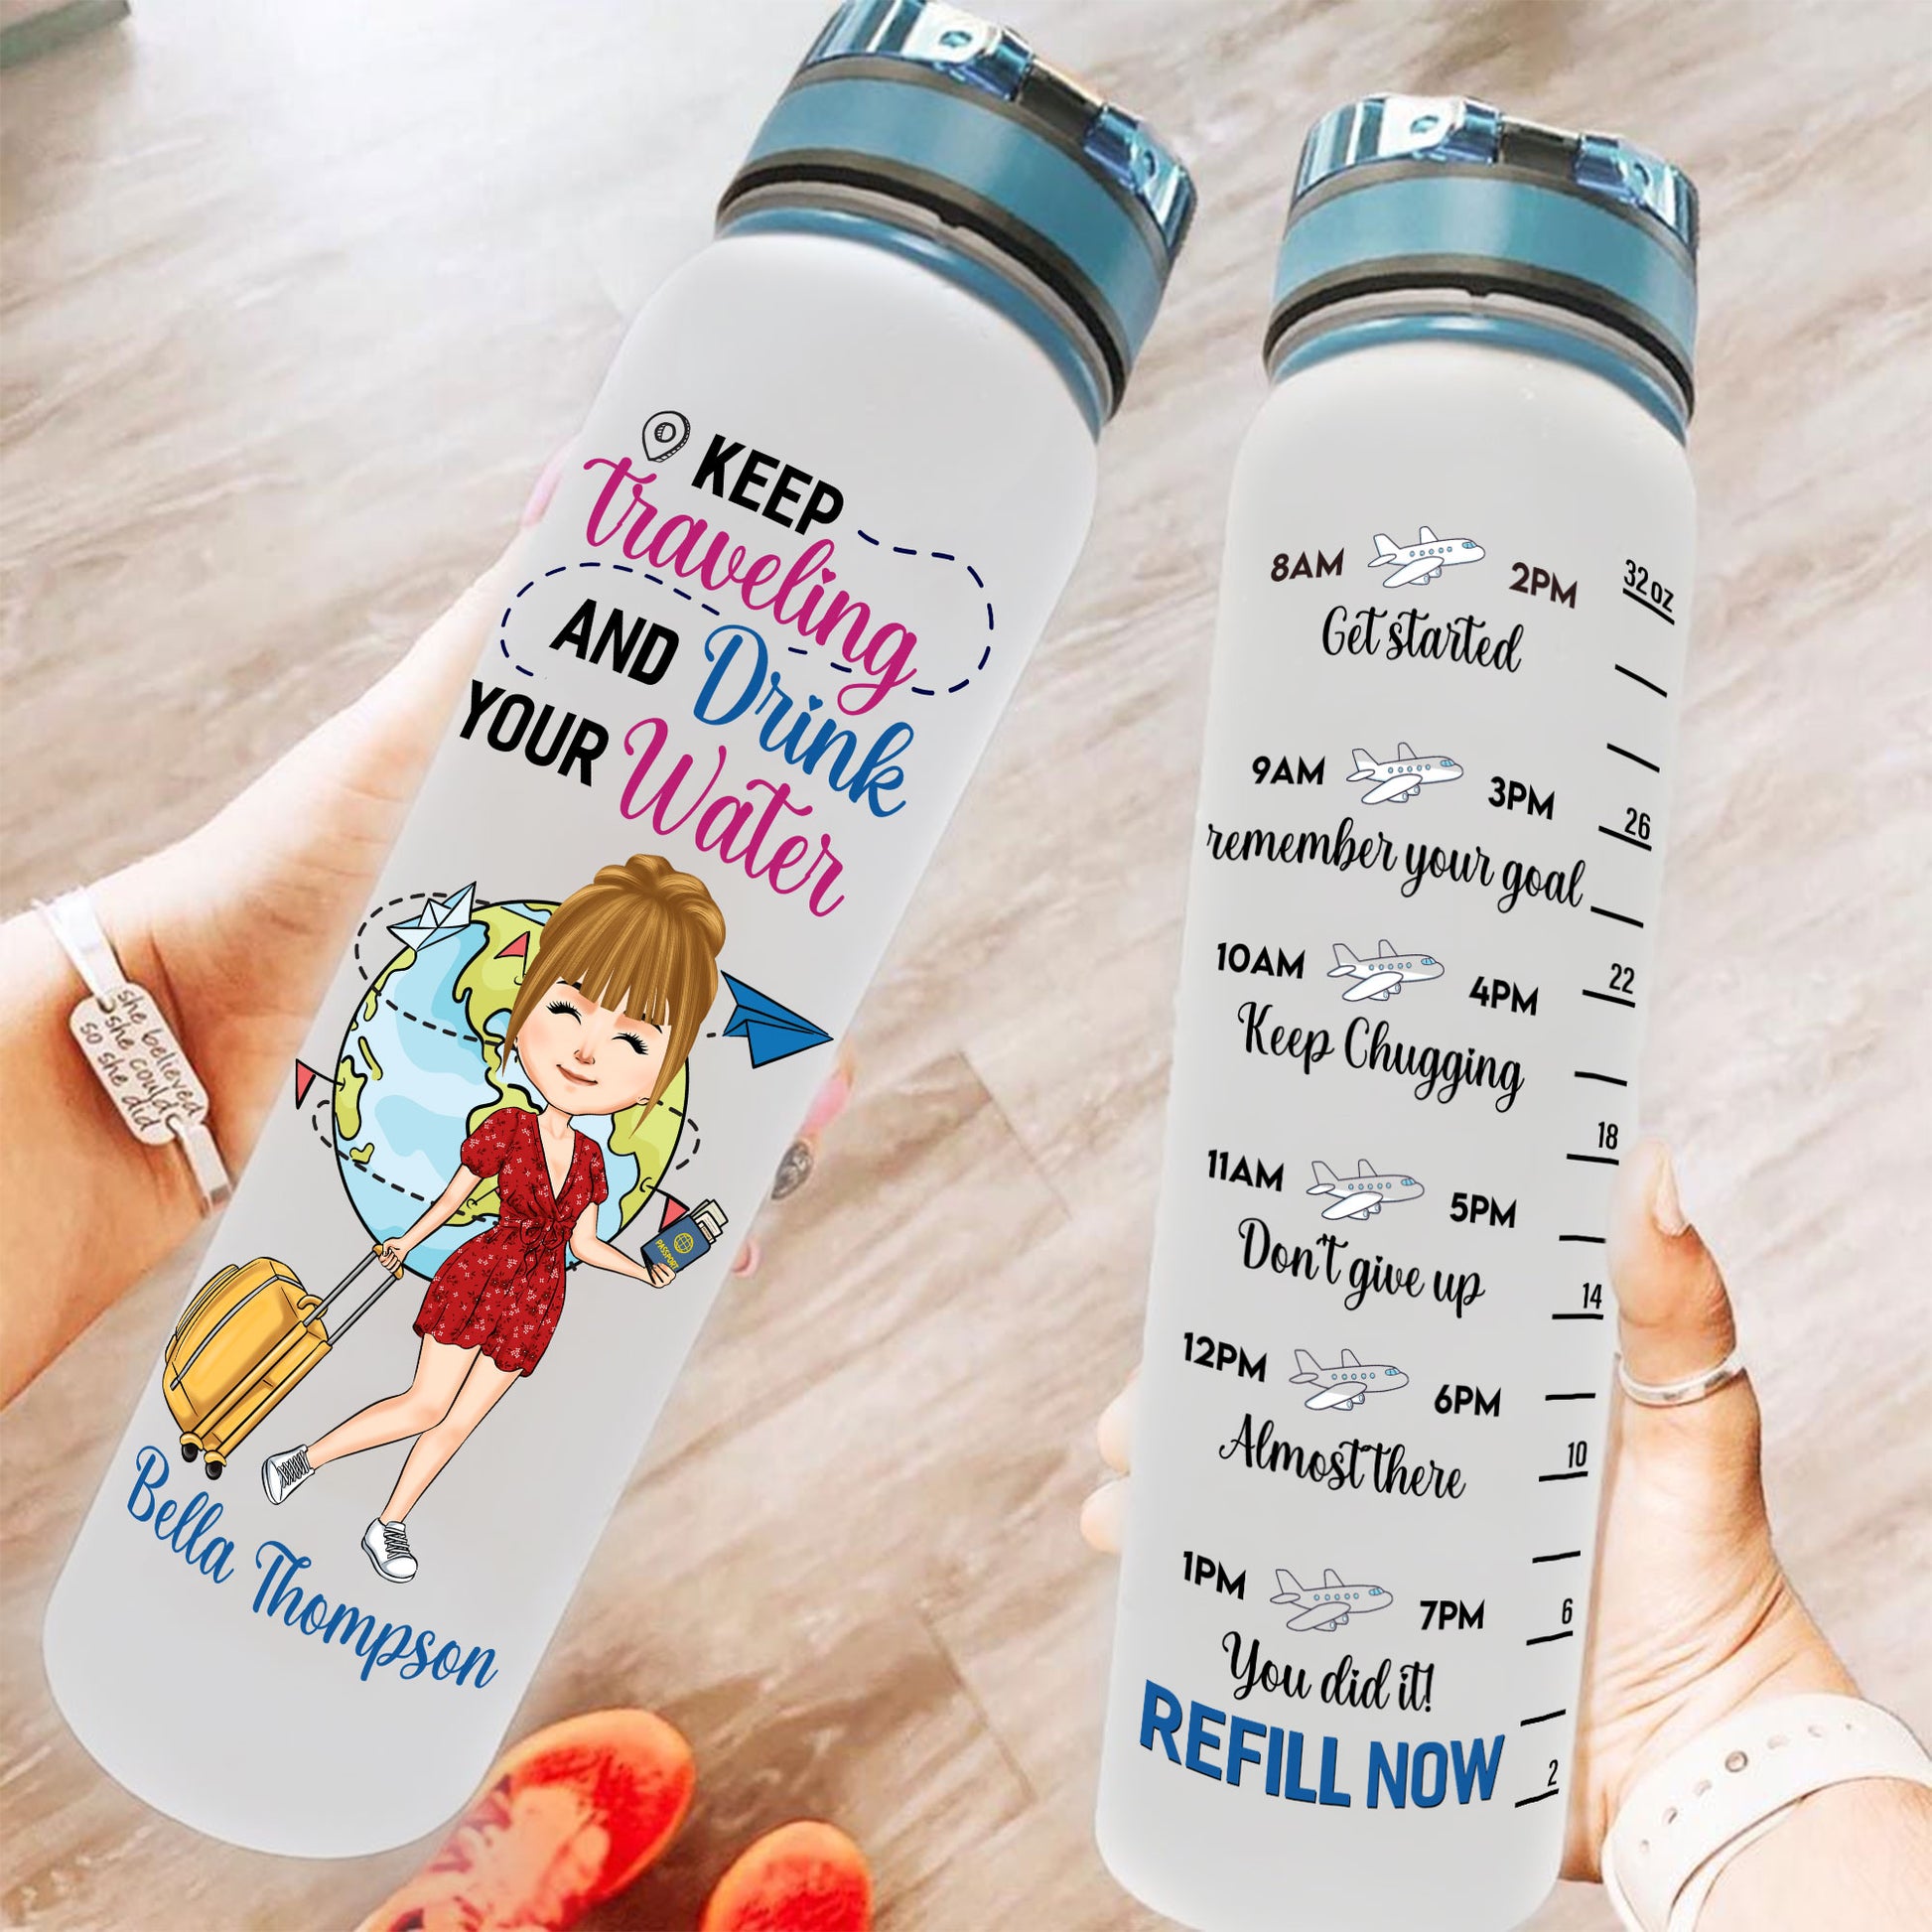 Keep Traveling And Drink Your Water - Personalized Water Bottle With Time Marker - Birthday Gift For Her, Girl, Friend, Travelers, Trippin'